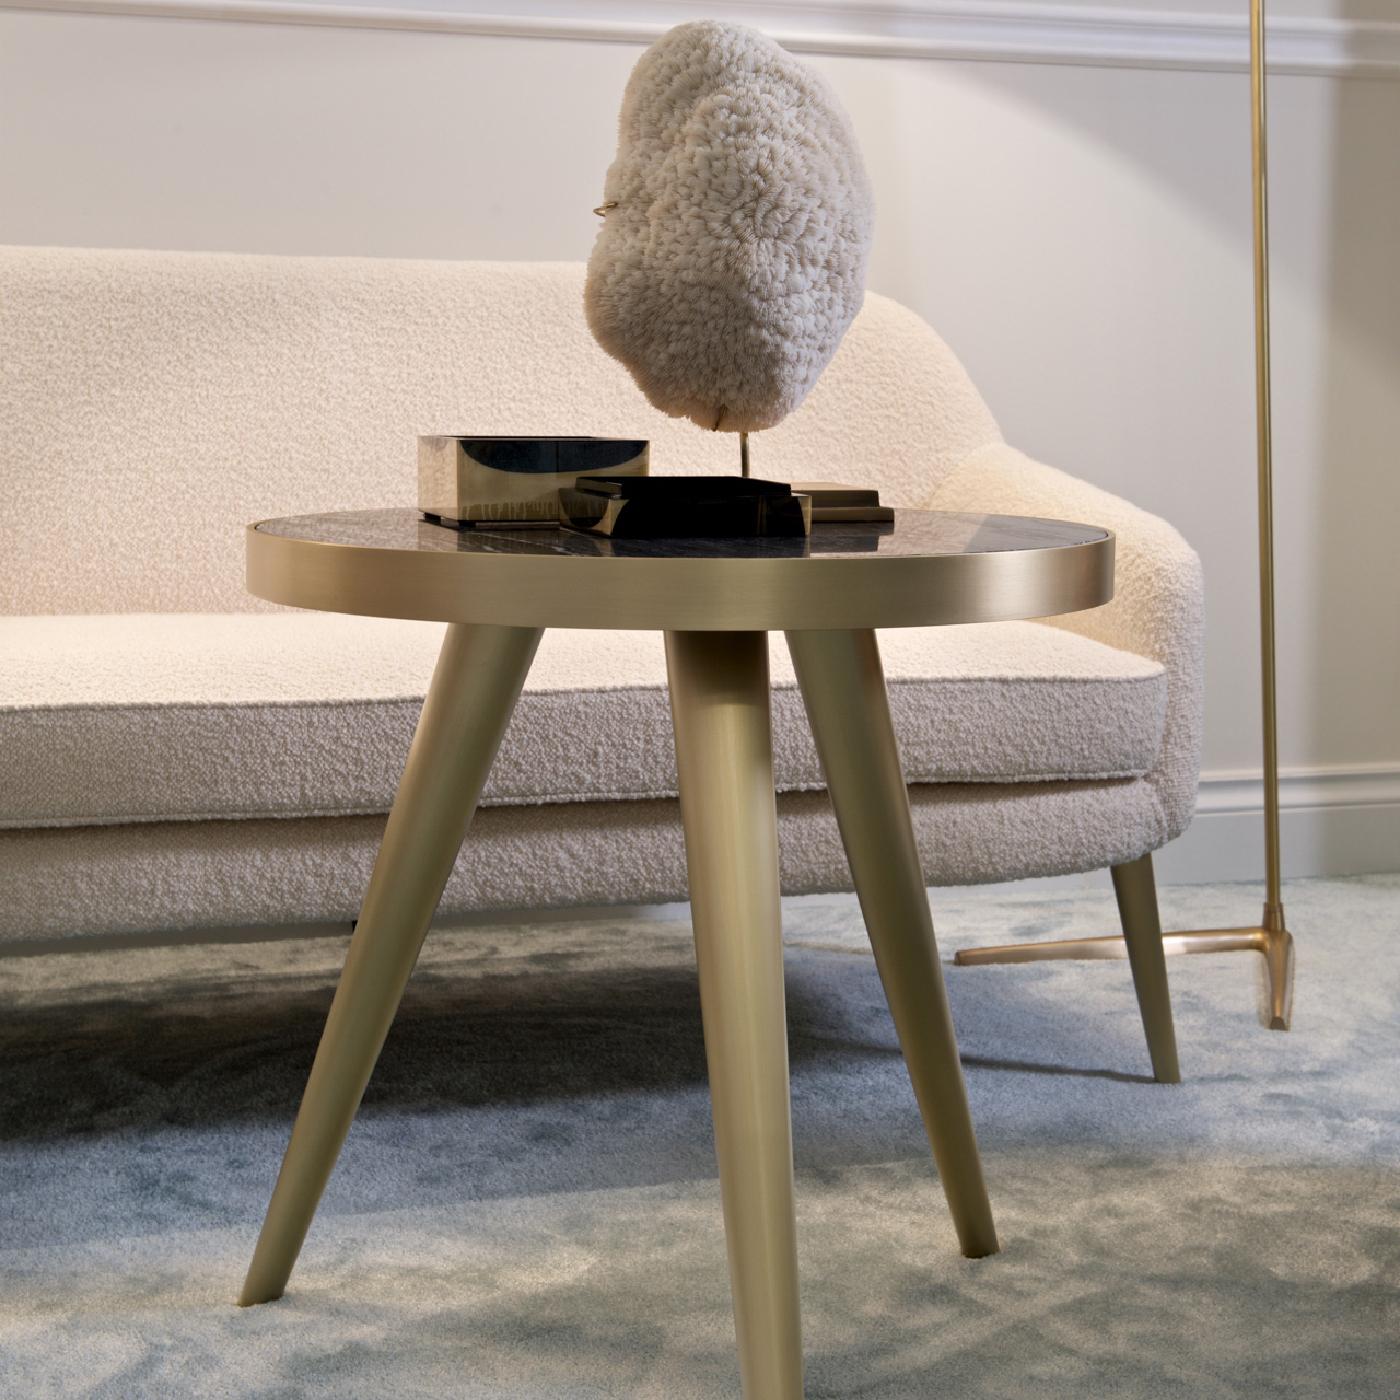 Part of the Jerome collection, this side table is a versatile and charming addition to a modern interior. Its slanted, tapered legs are a homage to mid-century charm and are crafted of satin-finished brass. The same elegant metal is the mounting for